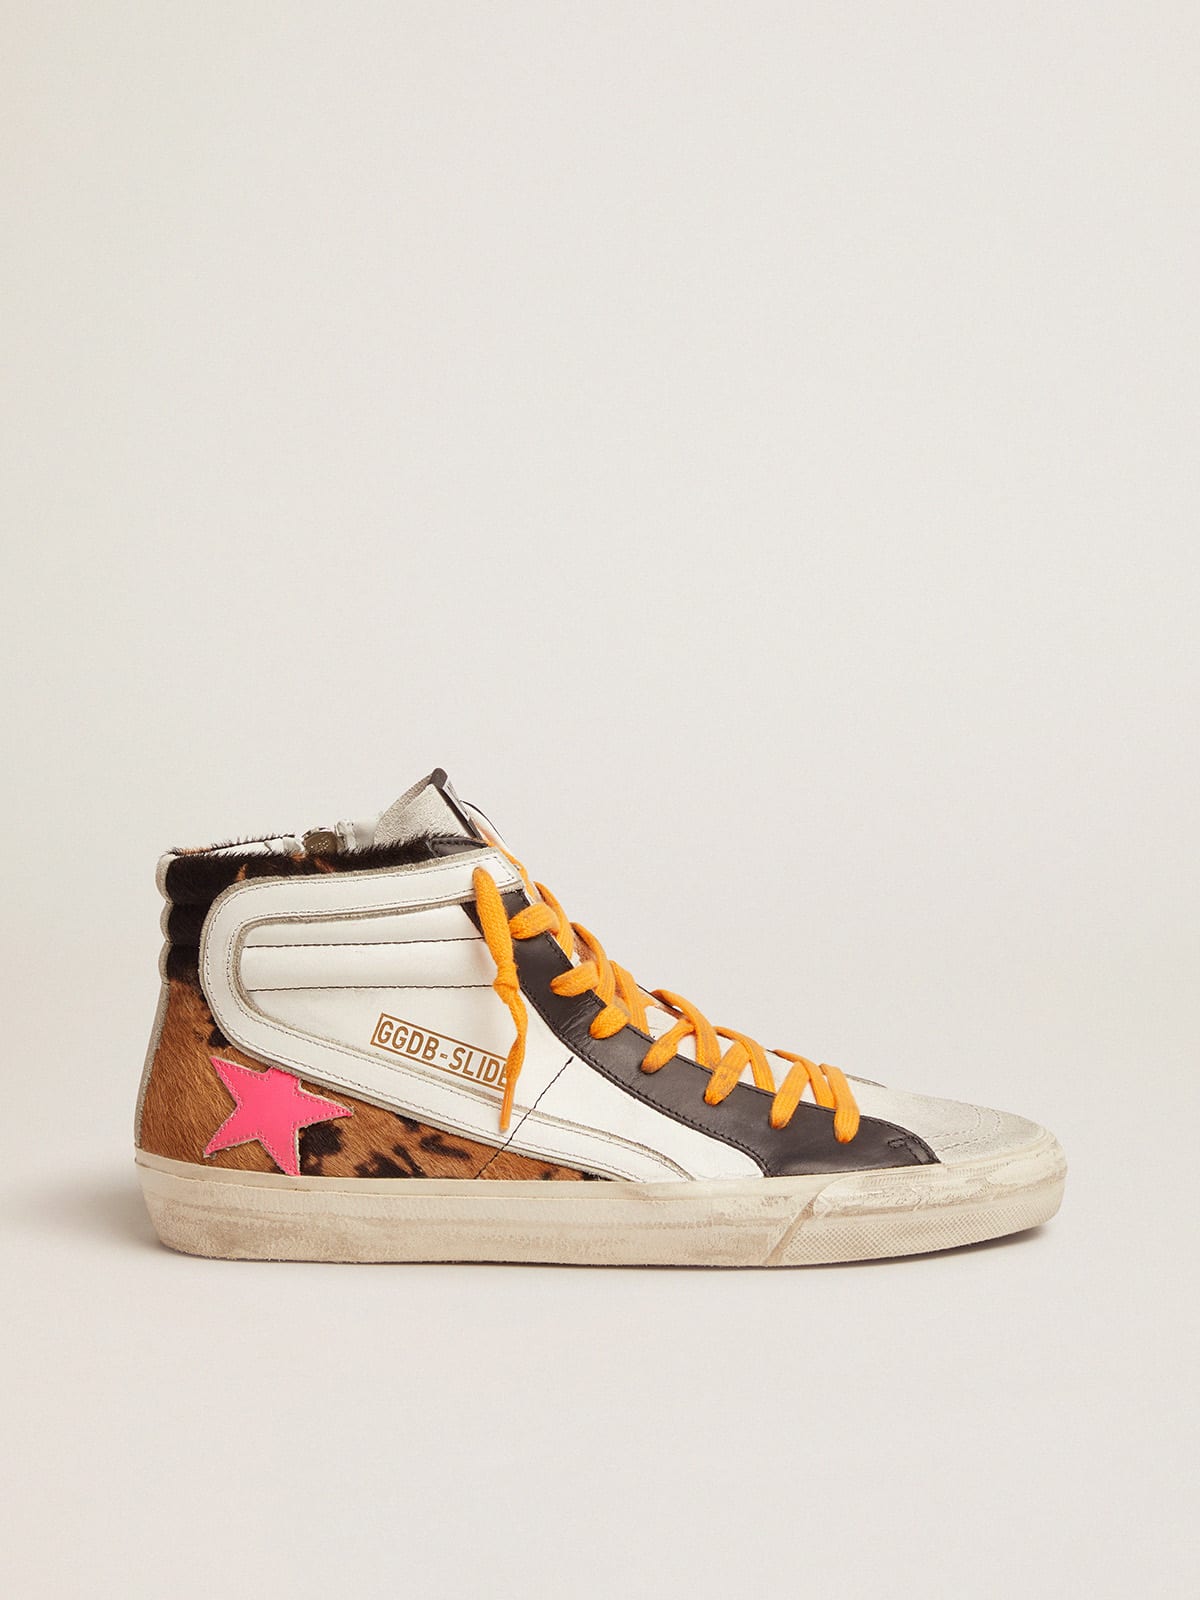 Golden Goose - Slide sneakers in pony skin with orange laces and a fuchsia star in 